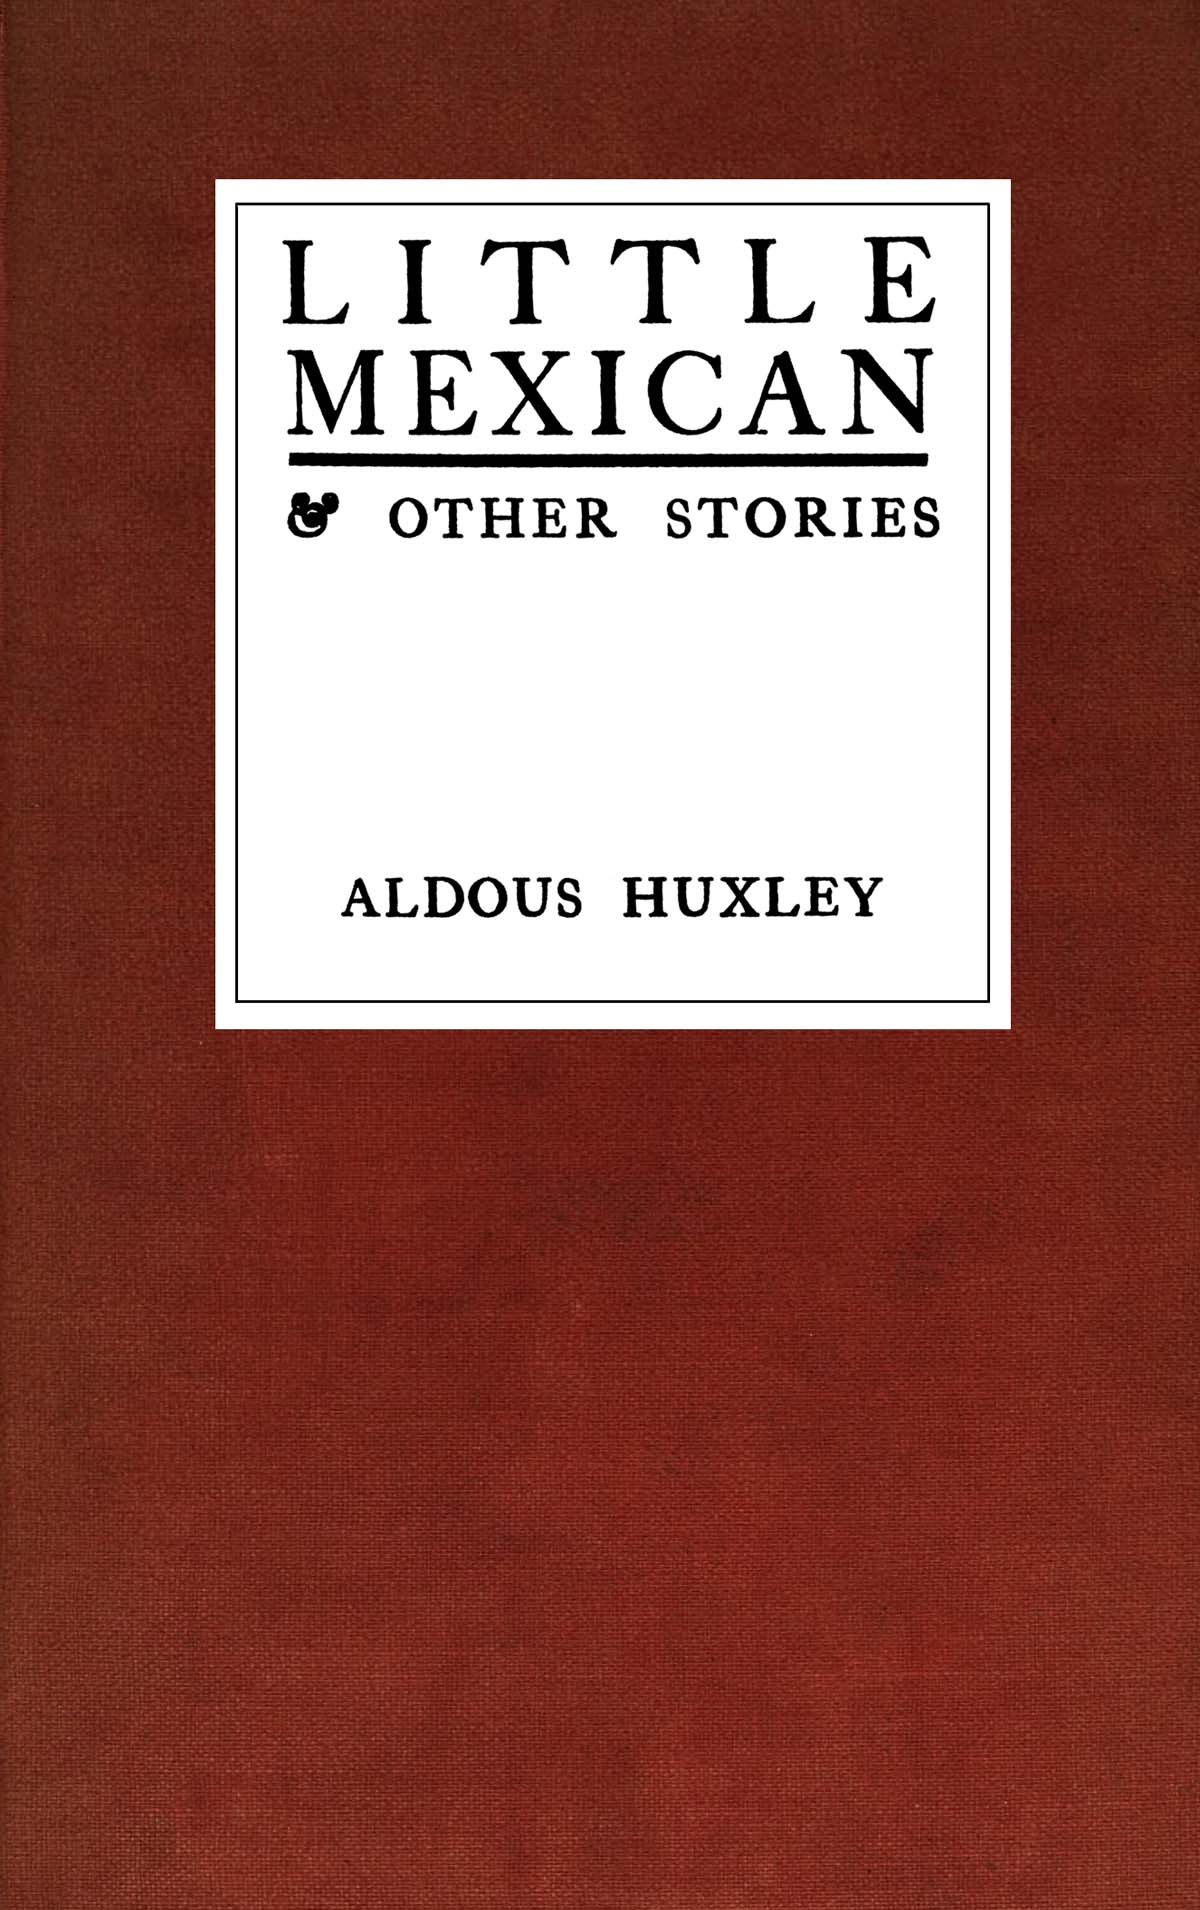 Little Mexican and Other Stories, by Aldous Huxley—A Project Gutenberg eBook